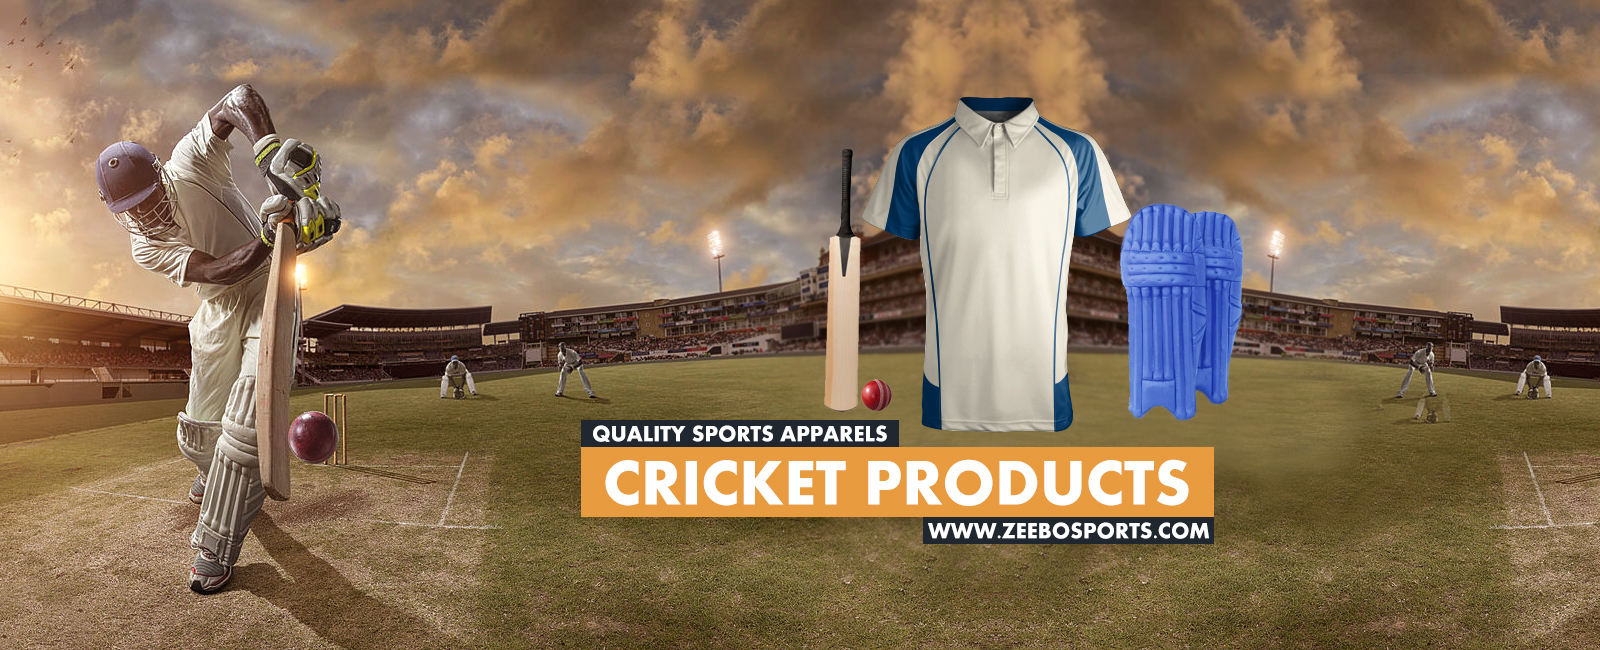 Cricket Products